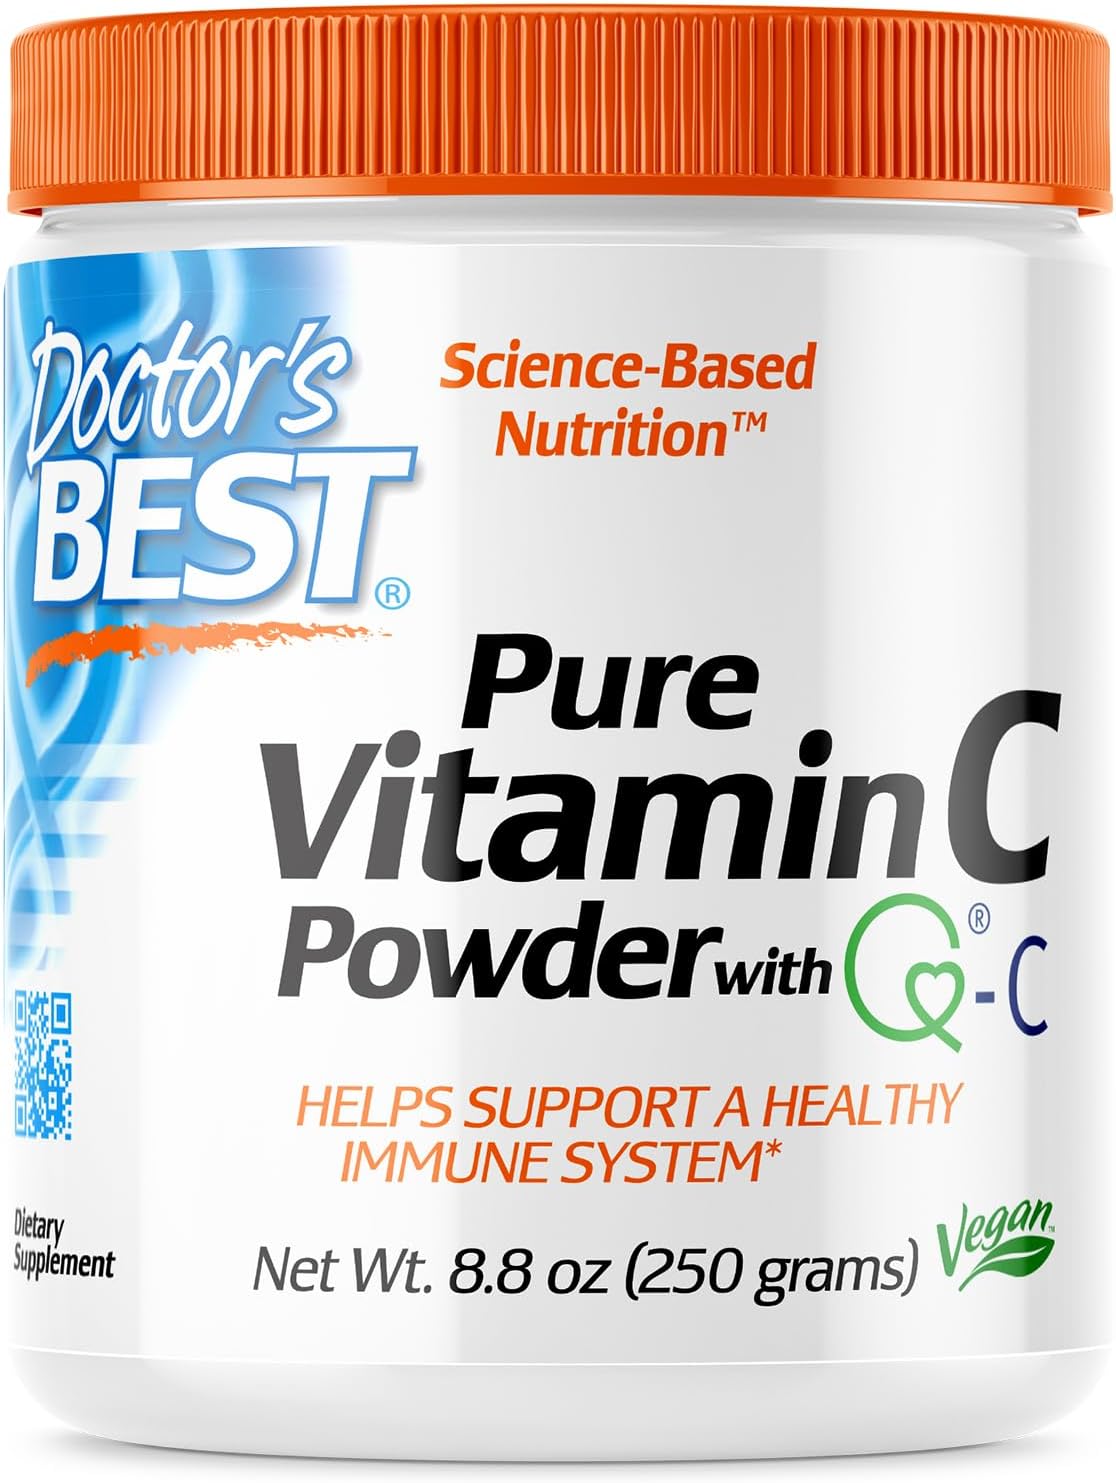 Doctor's Best Vitamin C Powder with Q-C, Healthy Immune System, Brain, Eyes, Heart and Circulation, Joints, Sourced from Scotland, 250G, 8.8 Ounce